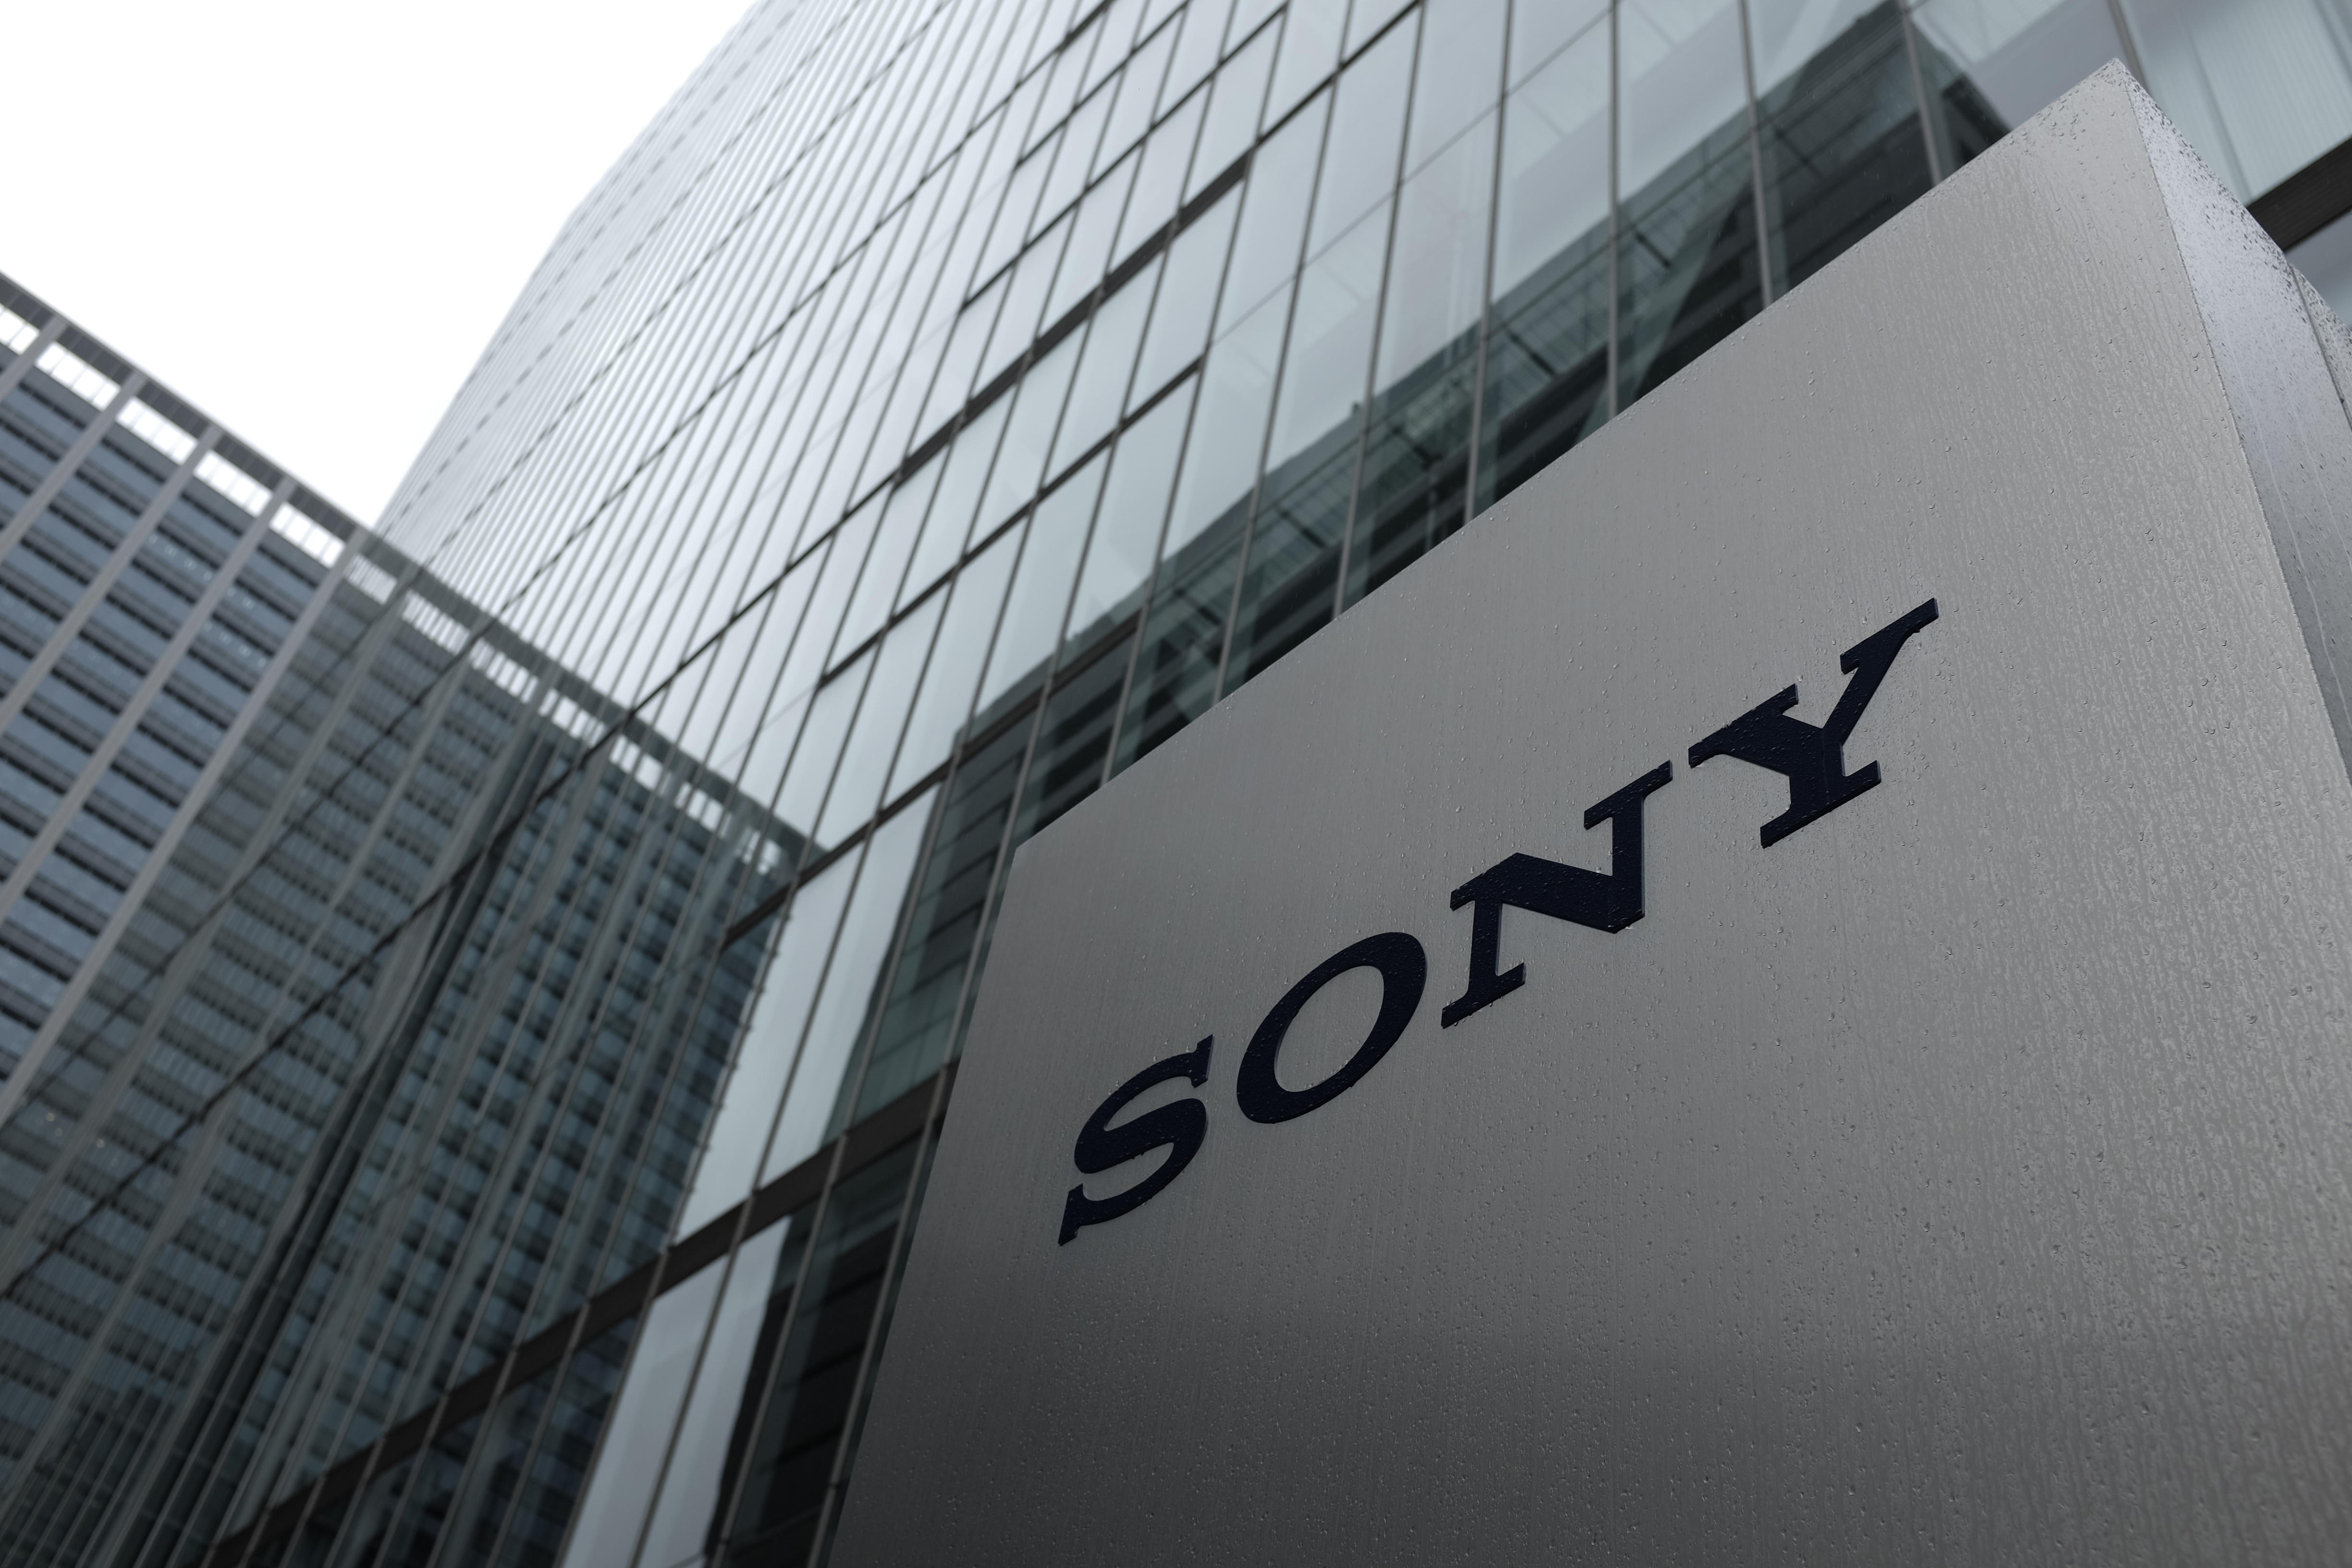 The logo of Sony Corp. is displayed at the company's headquarters in Tokyo on April 28, 2016.  Sony posted a 1.4 billion USD annual profit April 28, boosted by strong sales of its PlayStation console, but analysts warned that slowing smartphone demand could hit a lucrative business that makes key parts for mobile devices. / AFP PHOTO / KAZUHIRO NOGI